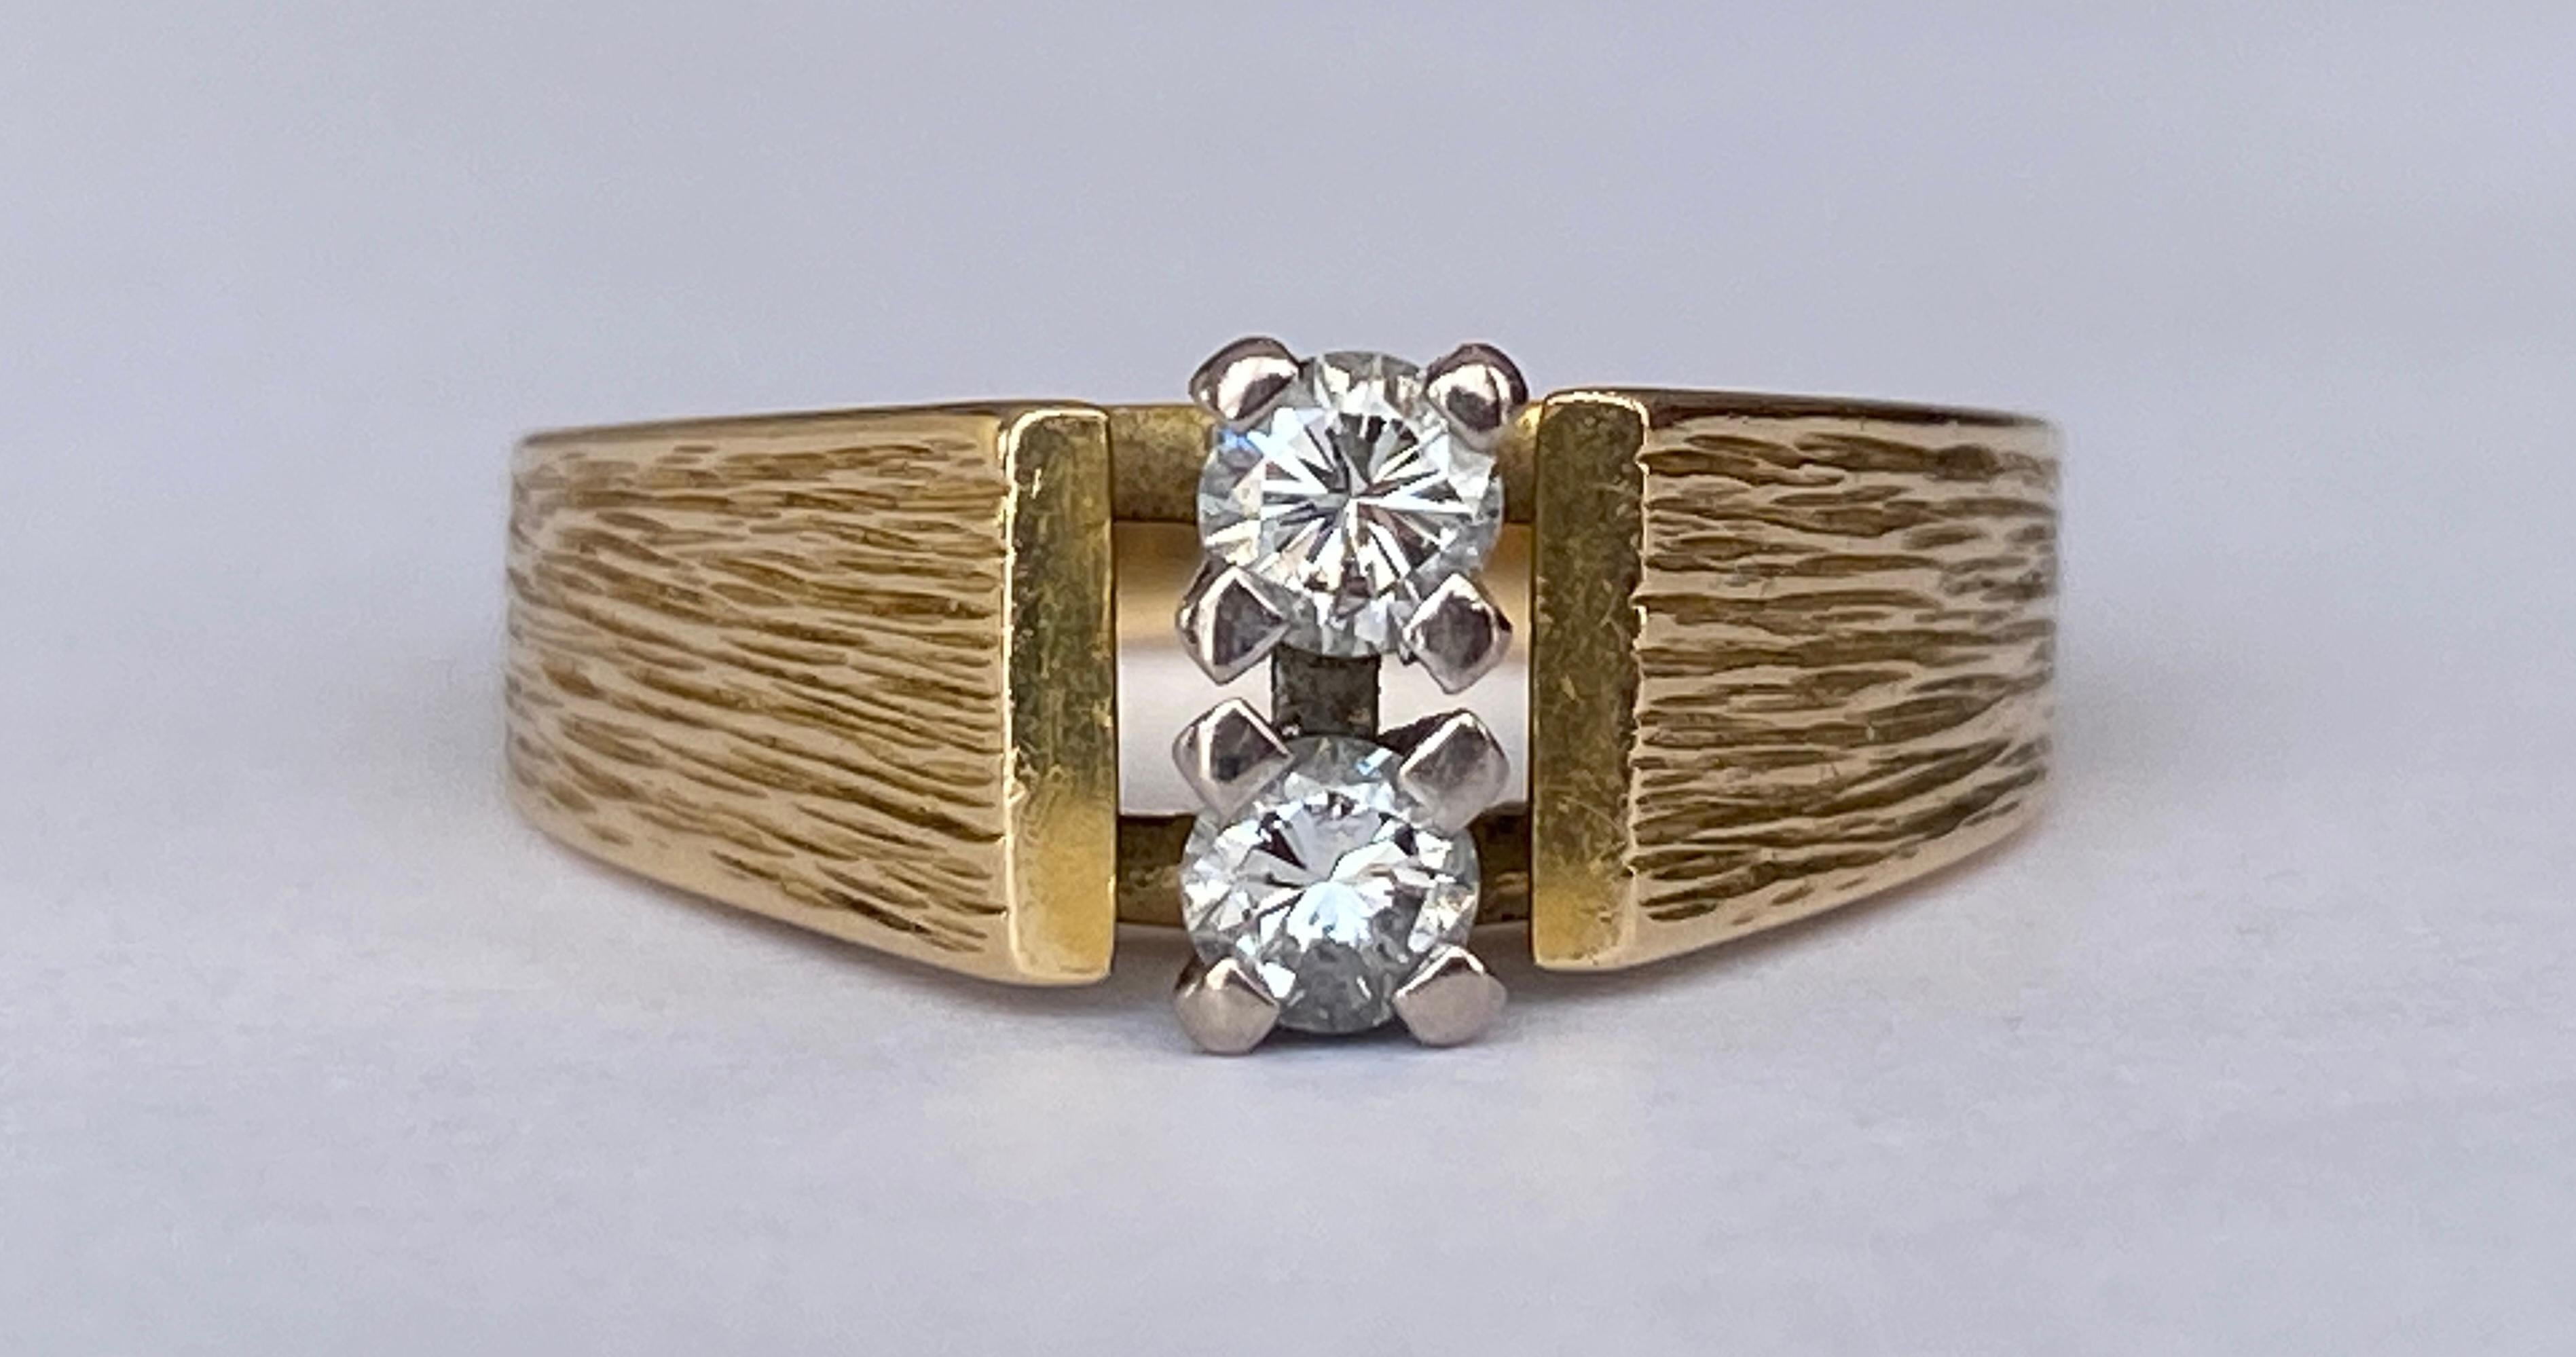 Offered in good condition, 18 karat yellow gold design ring with two brilliant-cut diamonds, approx. 0.22 ct, of quality H/VS/SI
Natural diamond –0.22 ct H/VS/SI ( 0,11 *2)
Quality: 750 (approved)
Weight: 5.8 grams
Ring size:16.25 mm